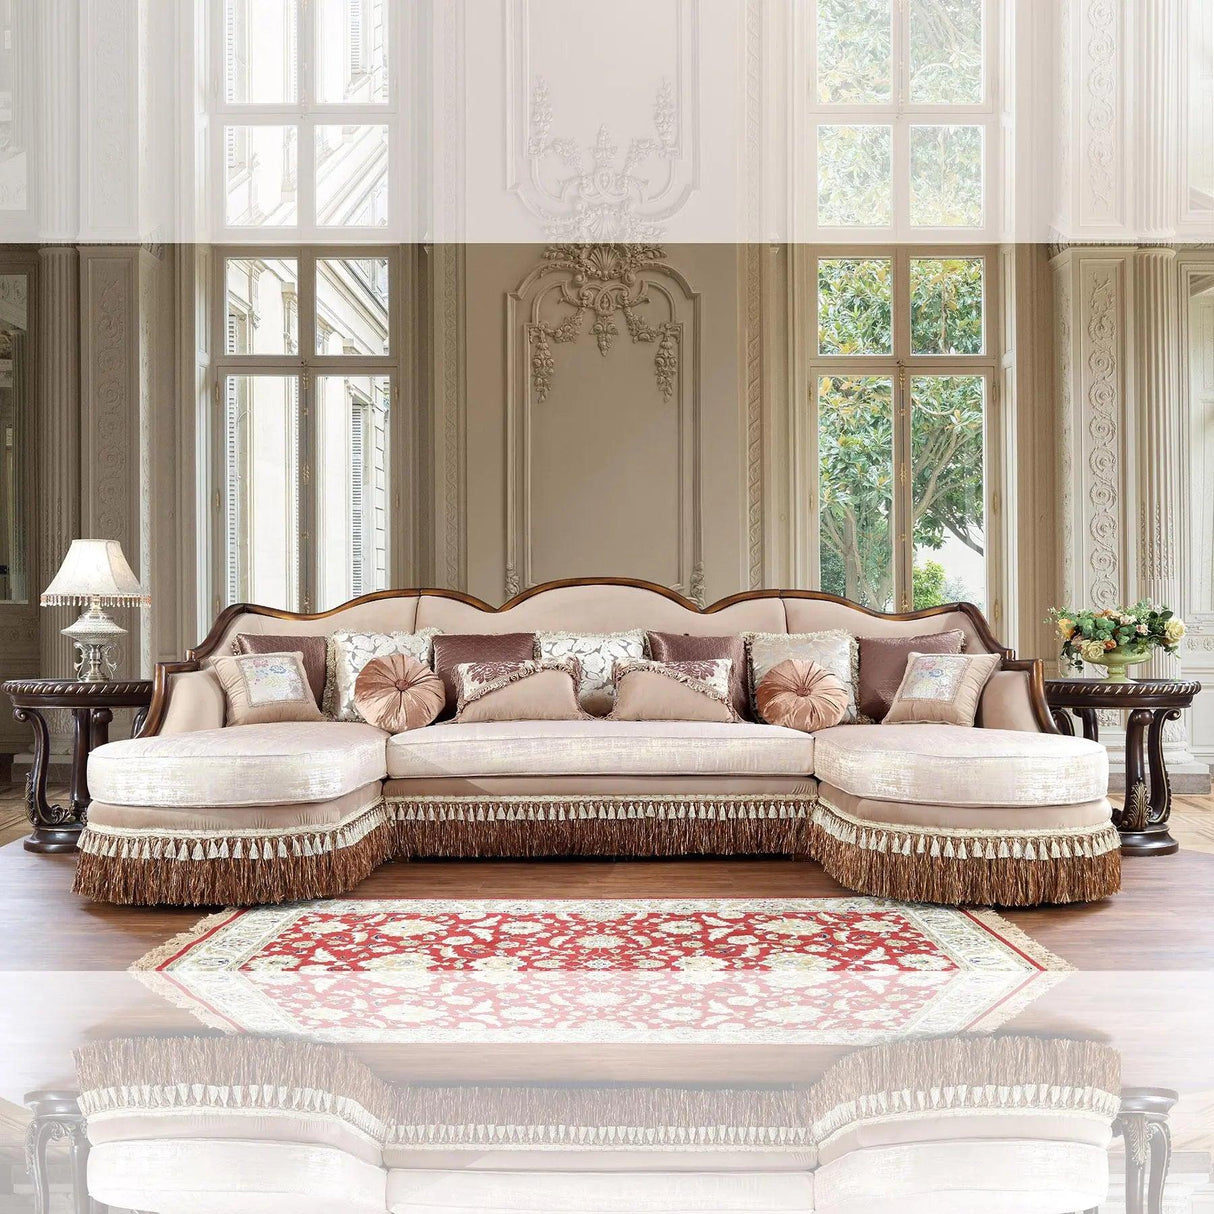 HD-91626 Traditional Sectional in Brown Cherry & Pearl Beige Finish by Homey Design Homey Design Furniture